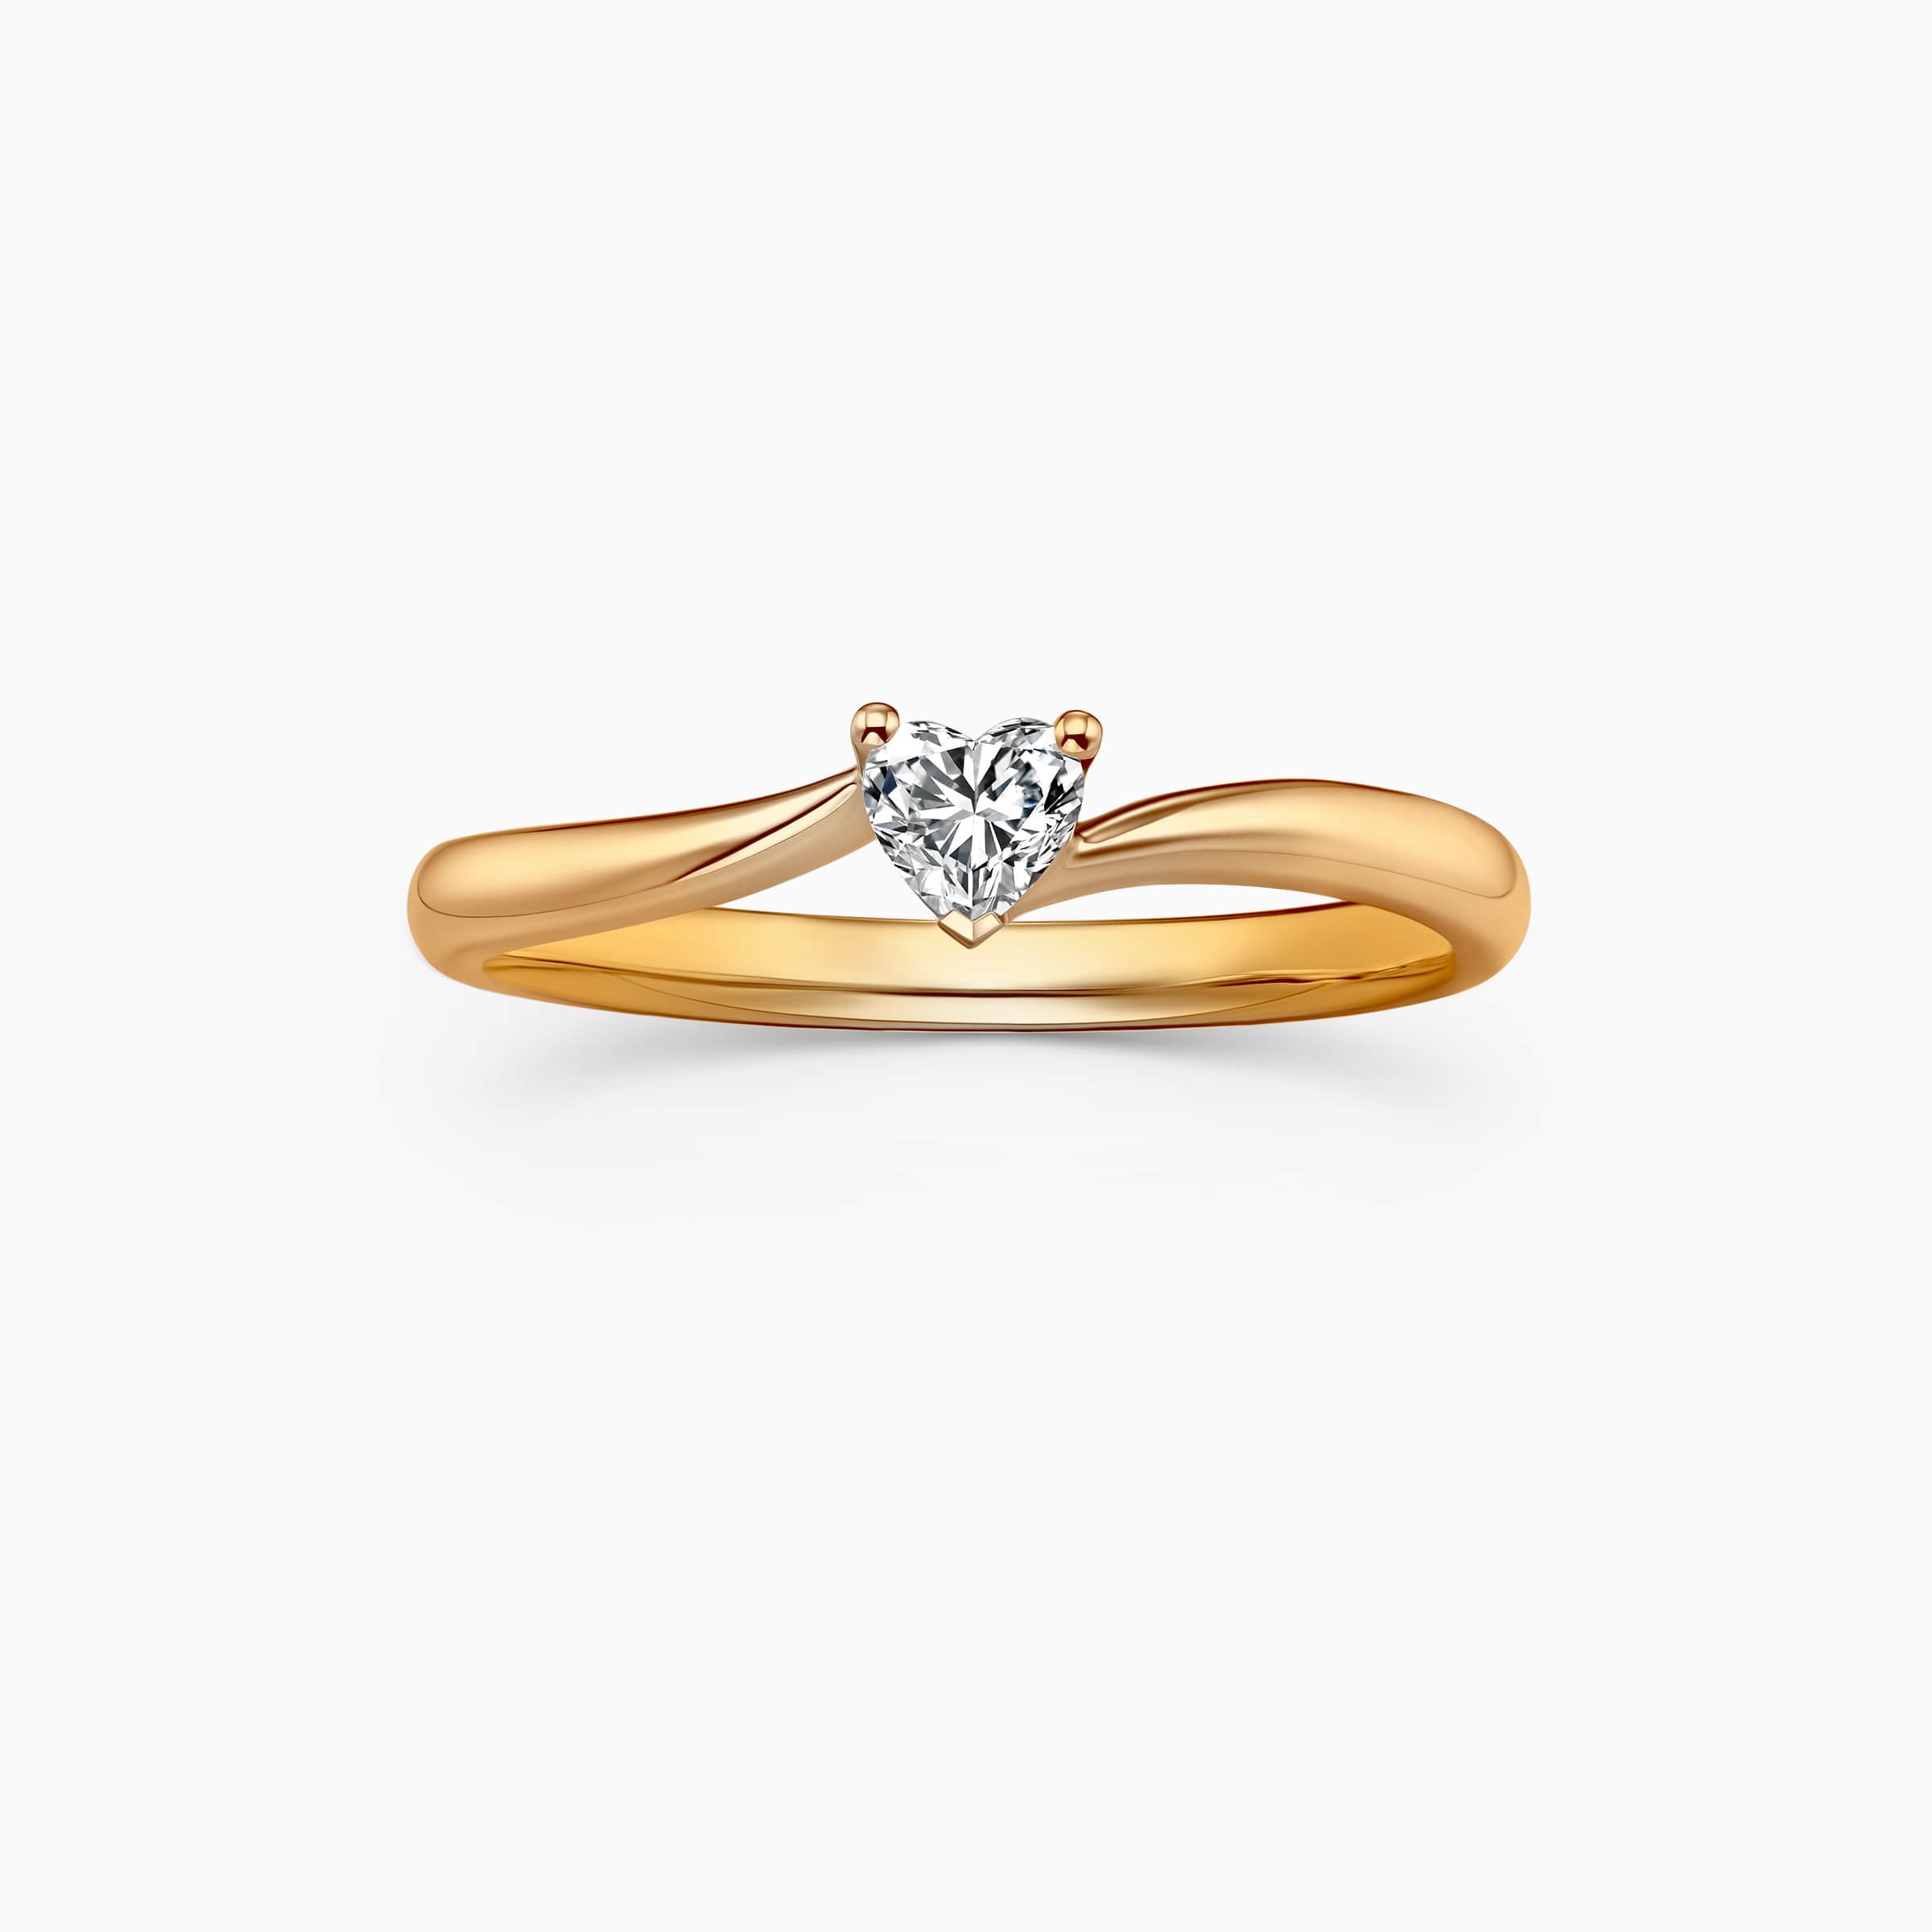 darry ring heart shaped solitaire engagement ring yellow gold